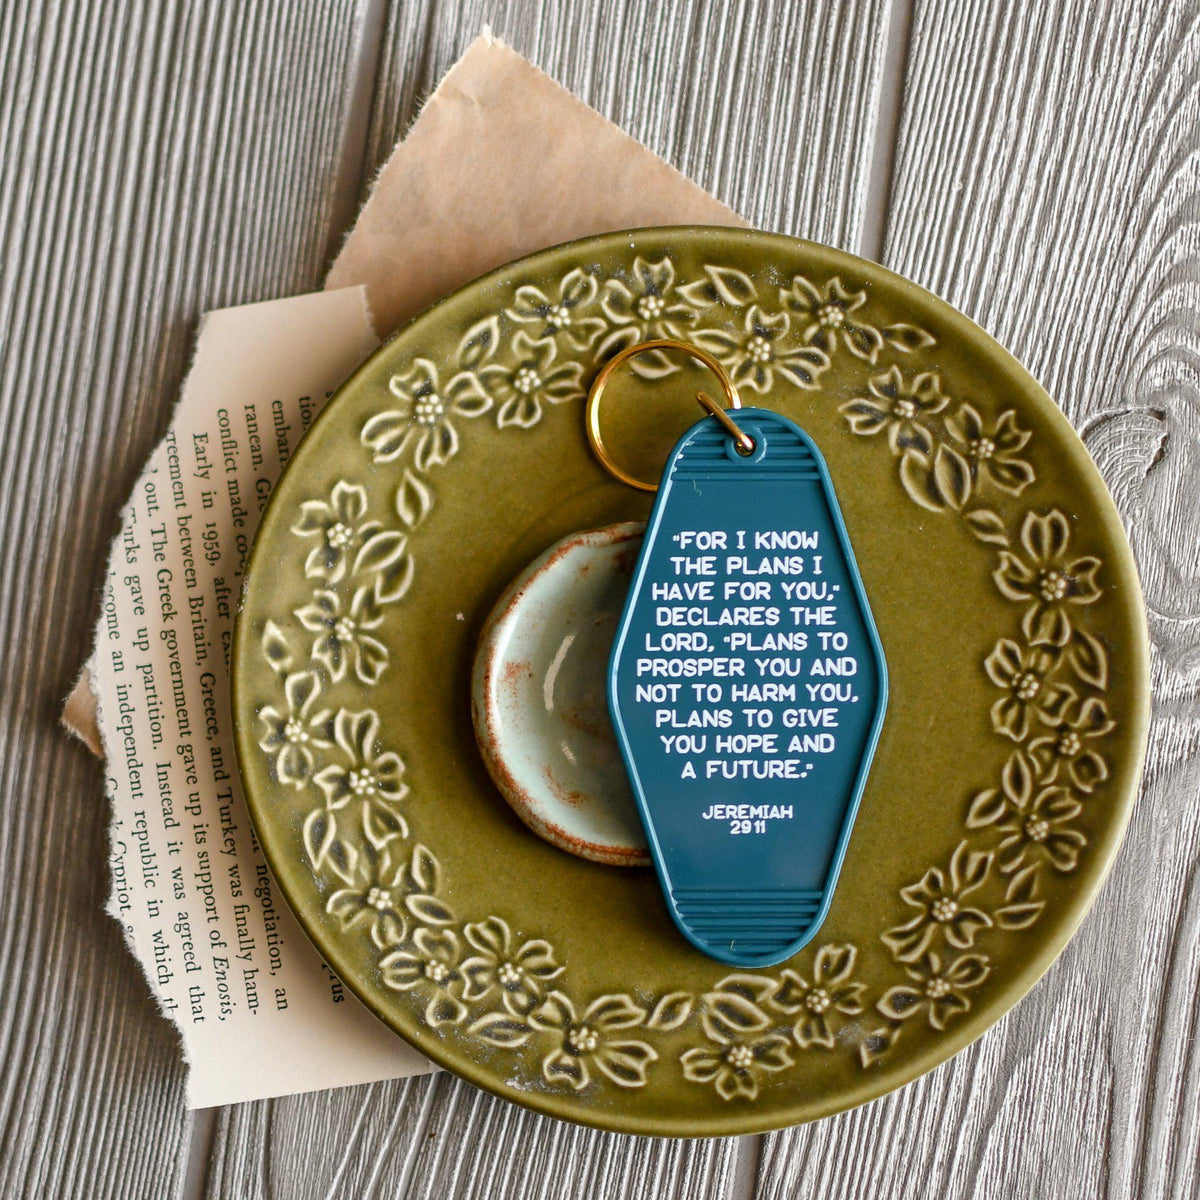 Jeremiah 29:11 I Know the Plans Key Chain, 2 3/4 x 1 5/8 Inches, Mardel